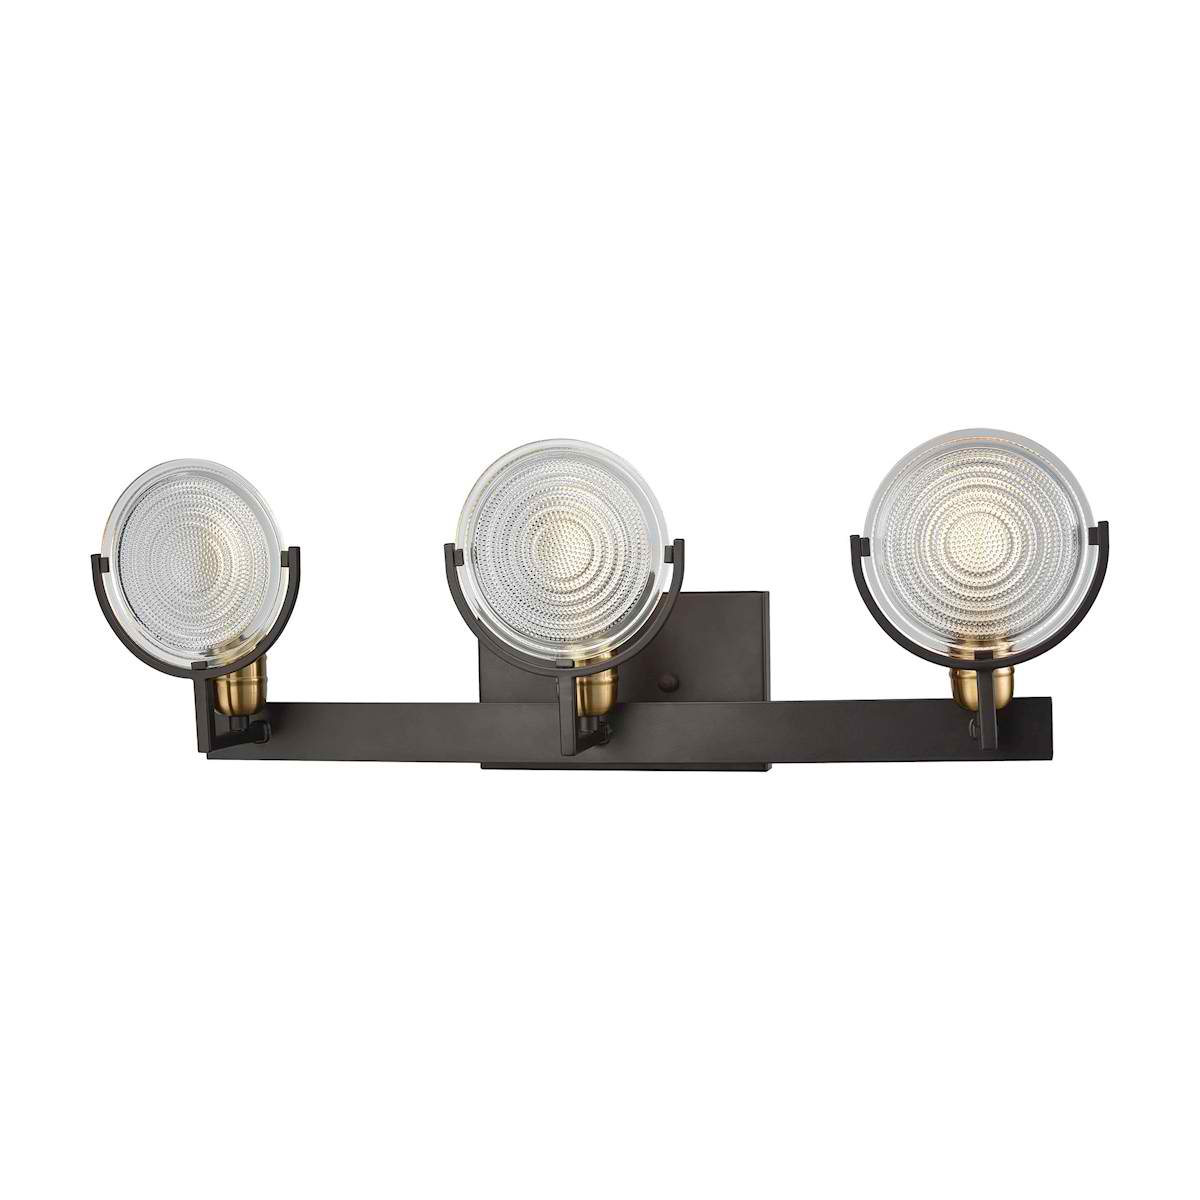 Ocular 3 Light Vanity in Oil Rubbed Bronze with Satin Brass Accents and Clear Railroad Light Glass